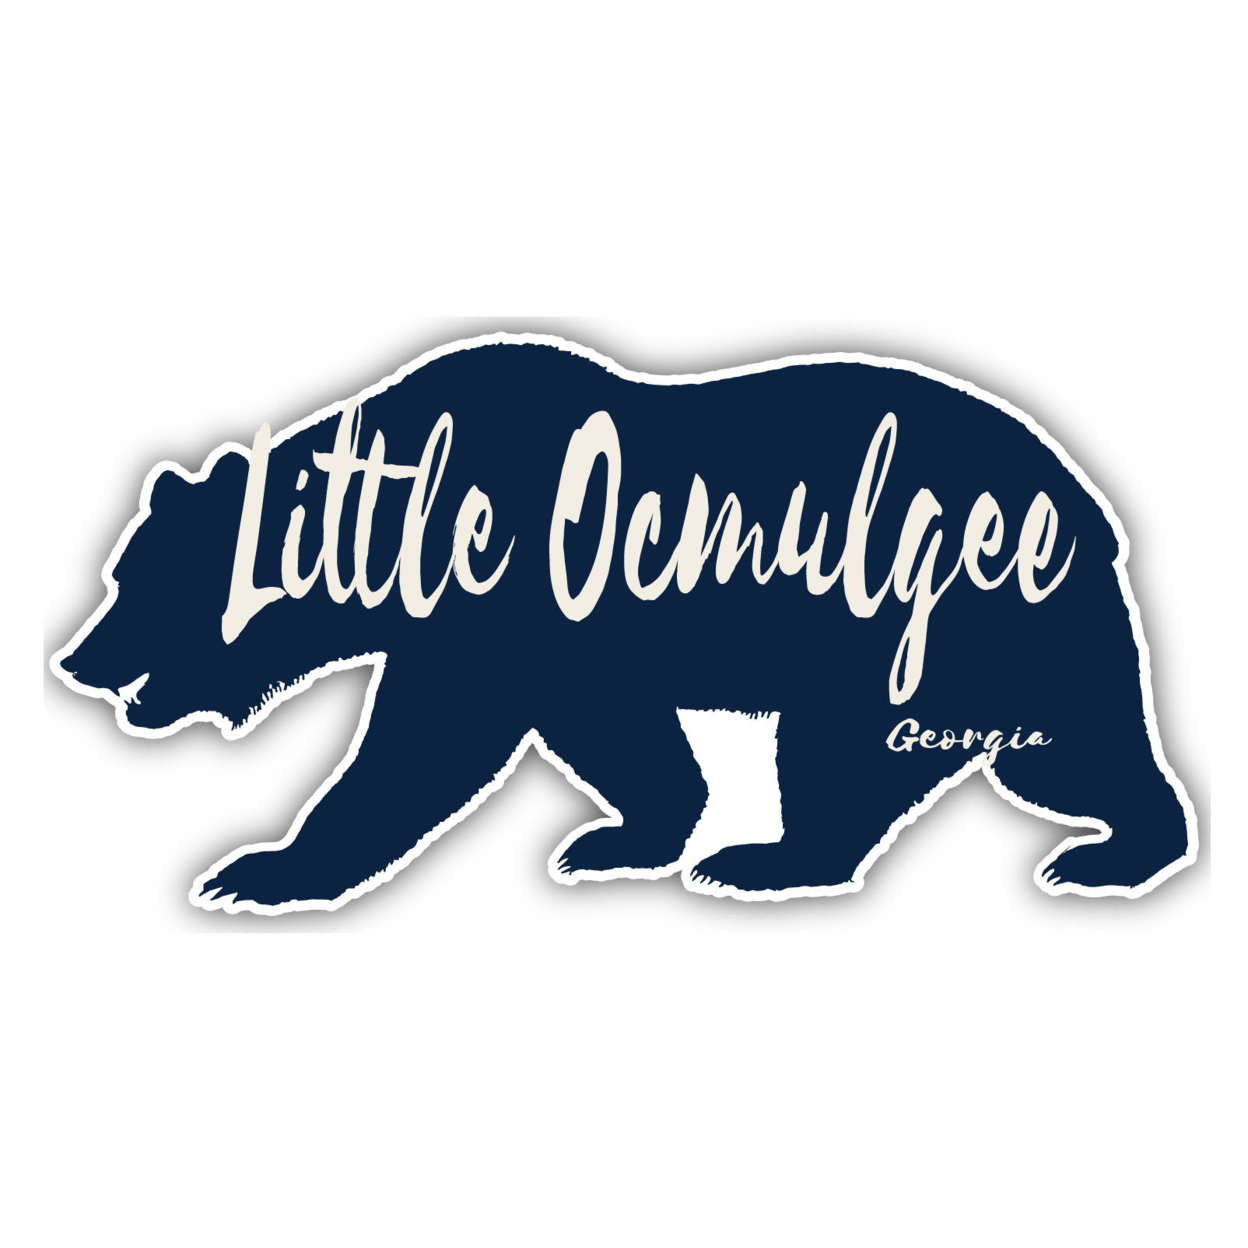 Little Ocmulgee Georgia Souvenir Decorative Stickers (Choose Theme And Size) - 2-Inch, Great Outdoors